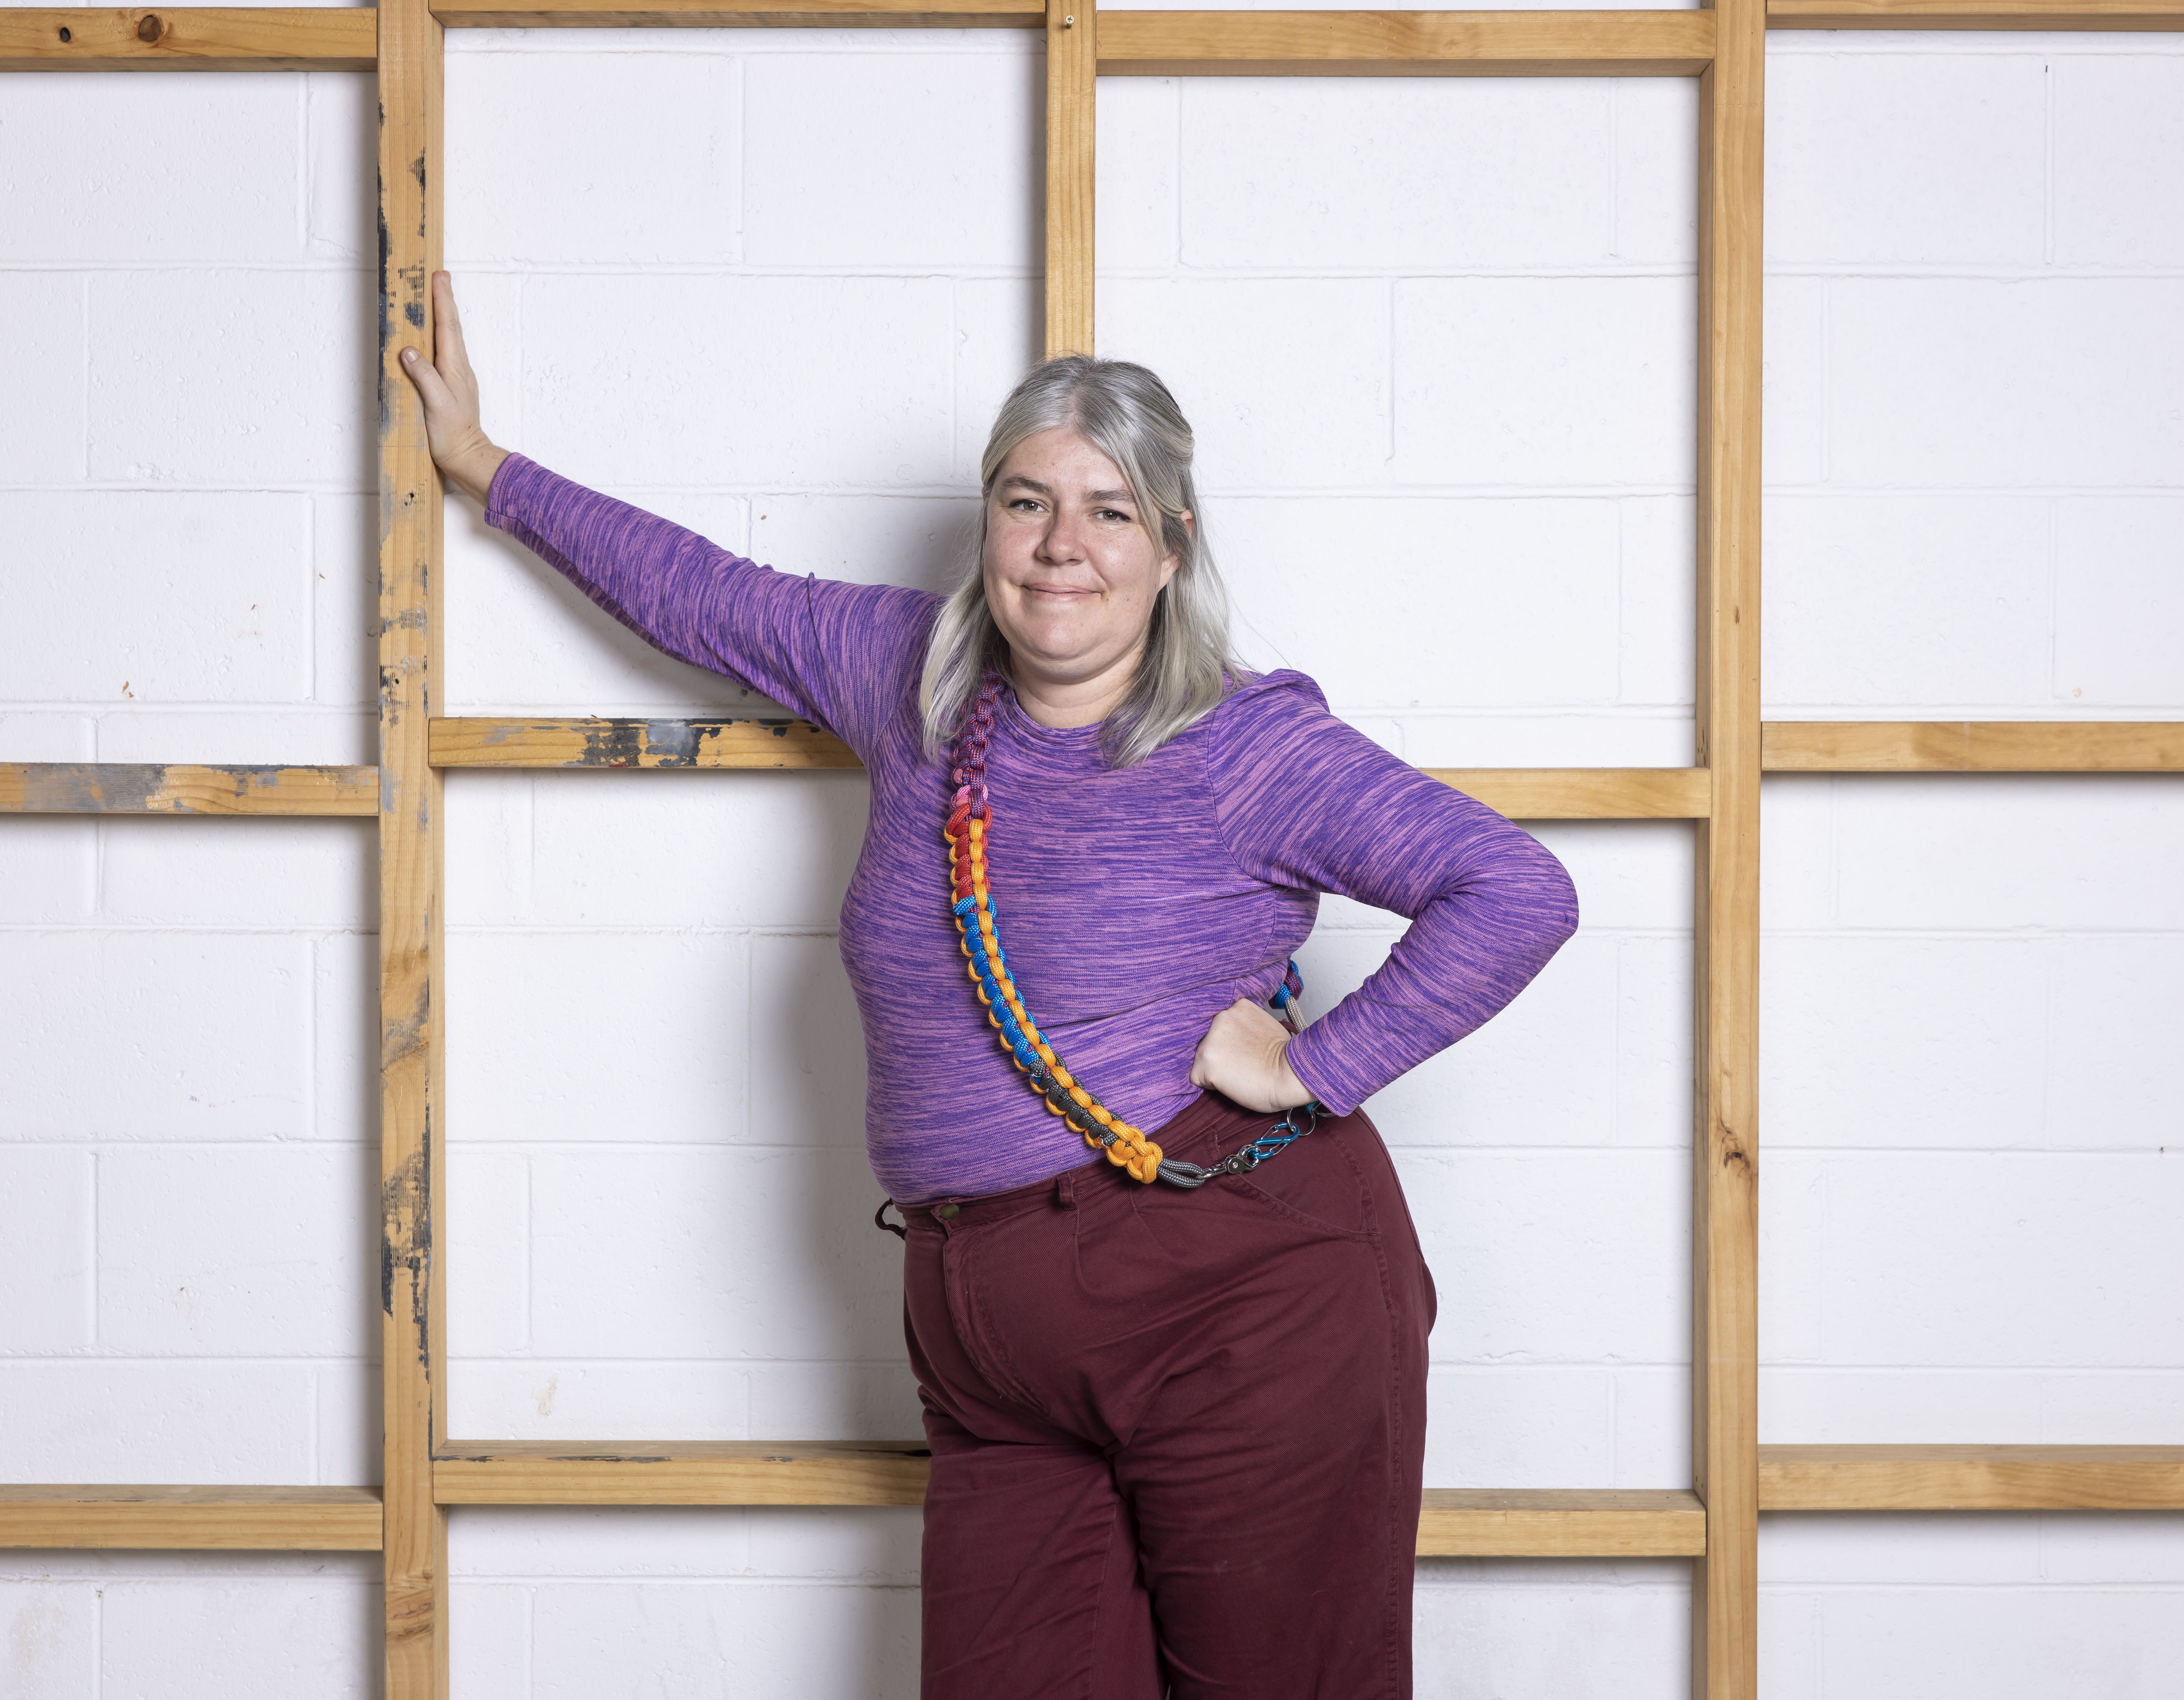 A woman with grey hair and brightly coloured clothing stands leaning against a wooden stud wall